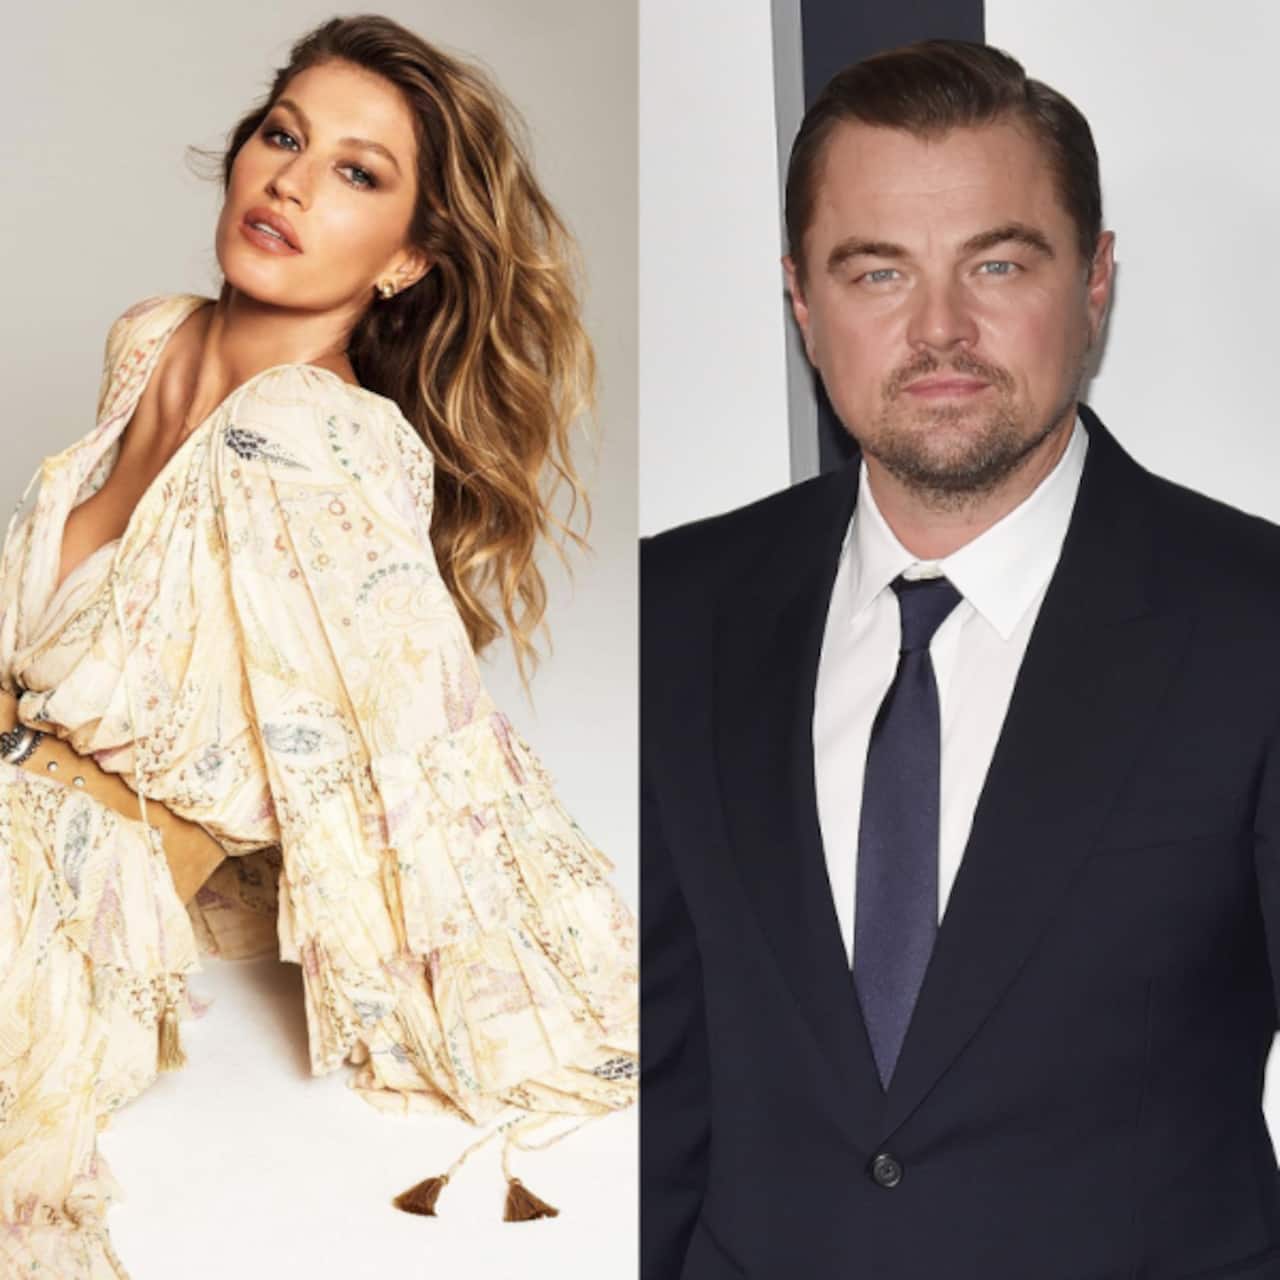 Leonardo DiCaprio's dating history with young women: Giselle Bundchen